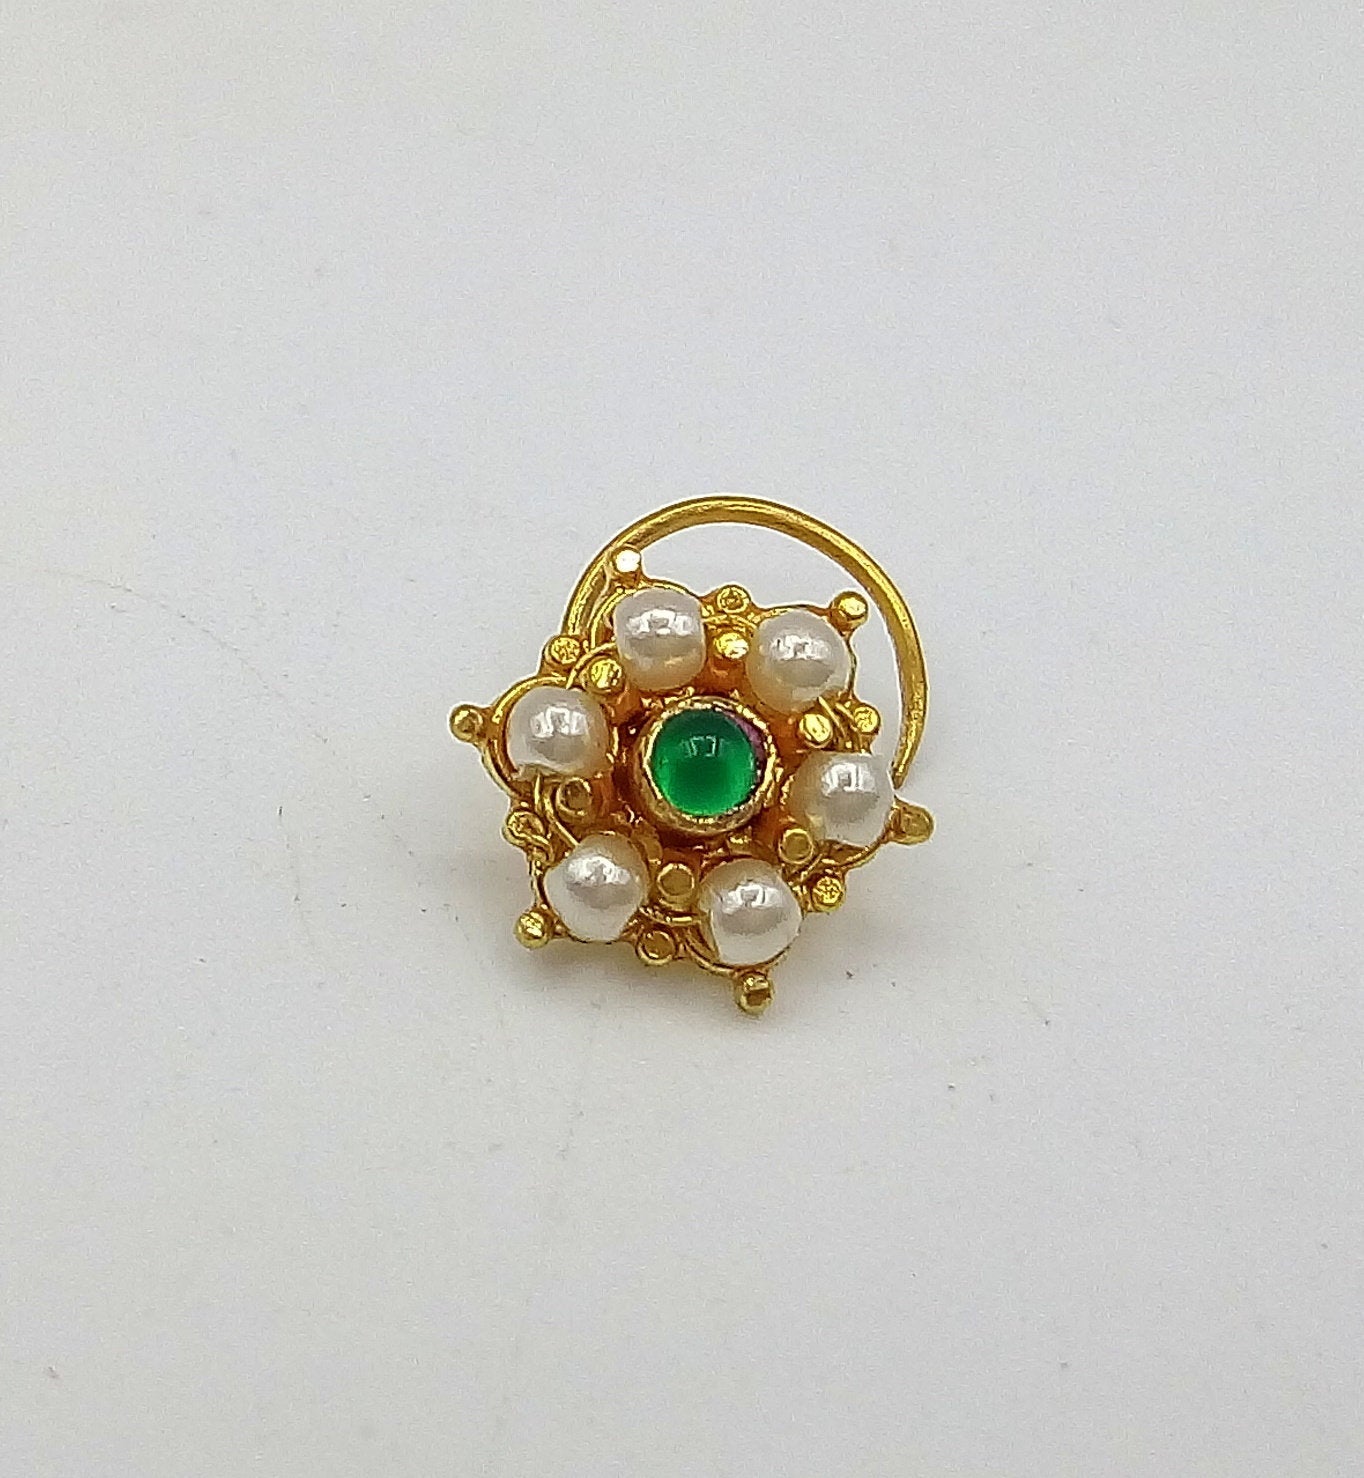 20k yellow gold handmade fabulous green stone pearl nose pin excellent antique vintage design tribal jewelry gnp20 - TRIBAL ORNAMENTS